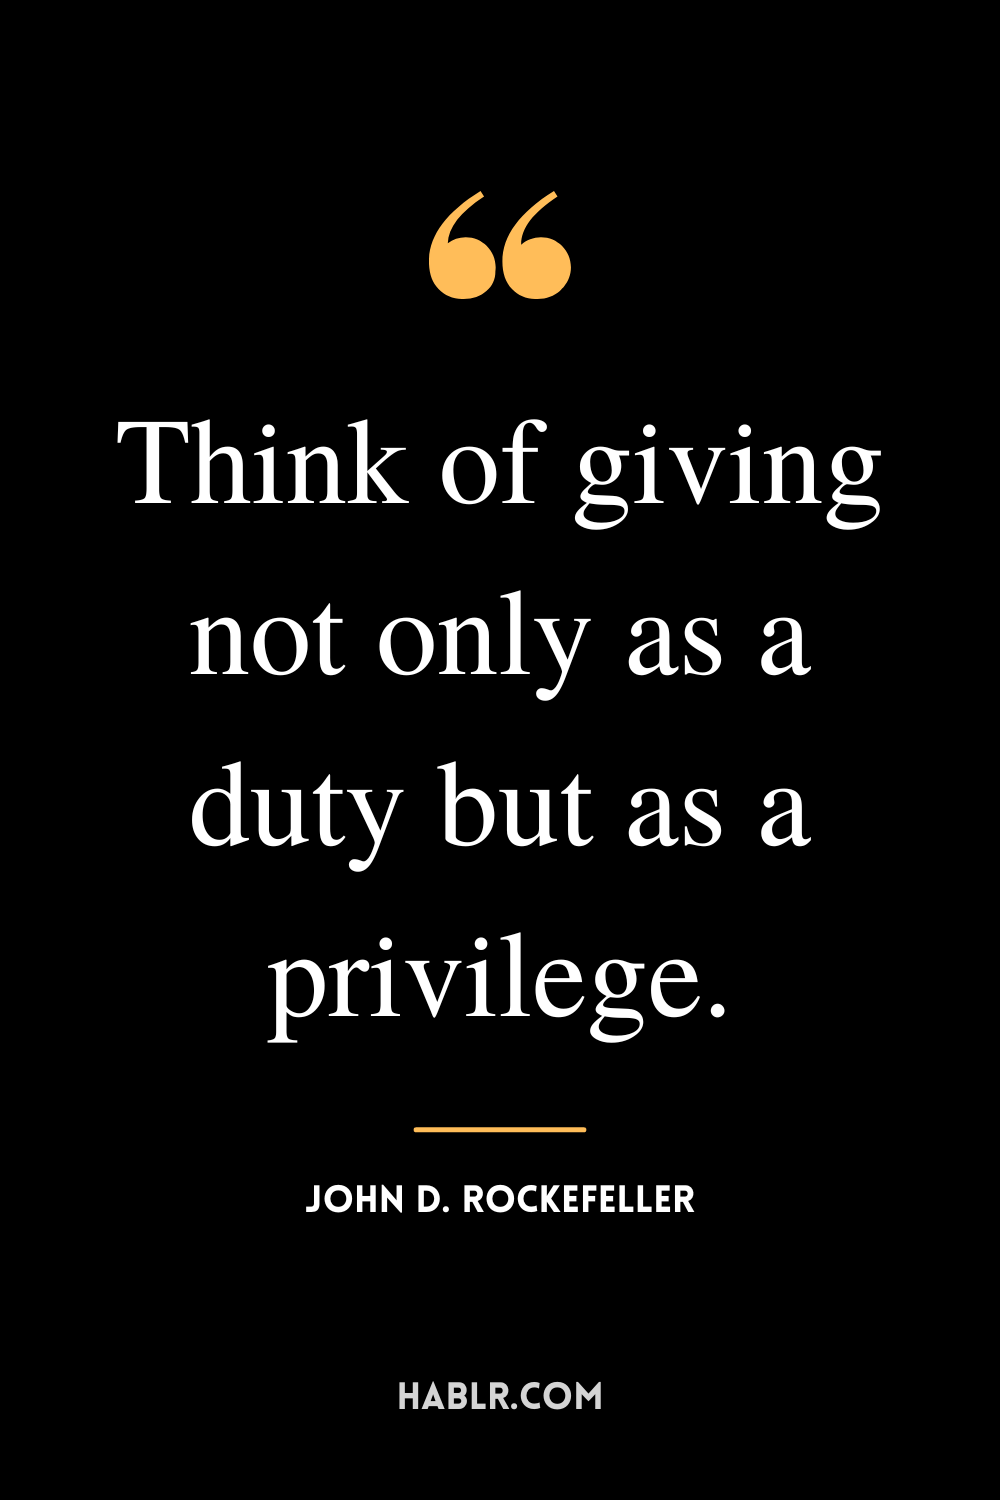 “Think of giving not only as a duty but as a privilege.” -John D. Rockefeller